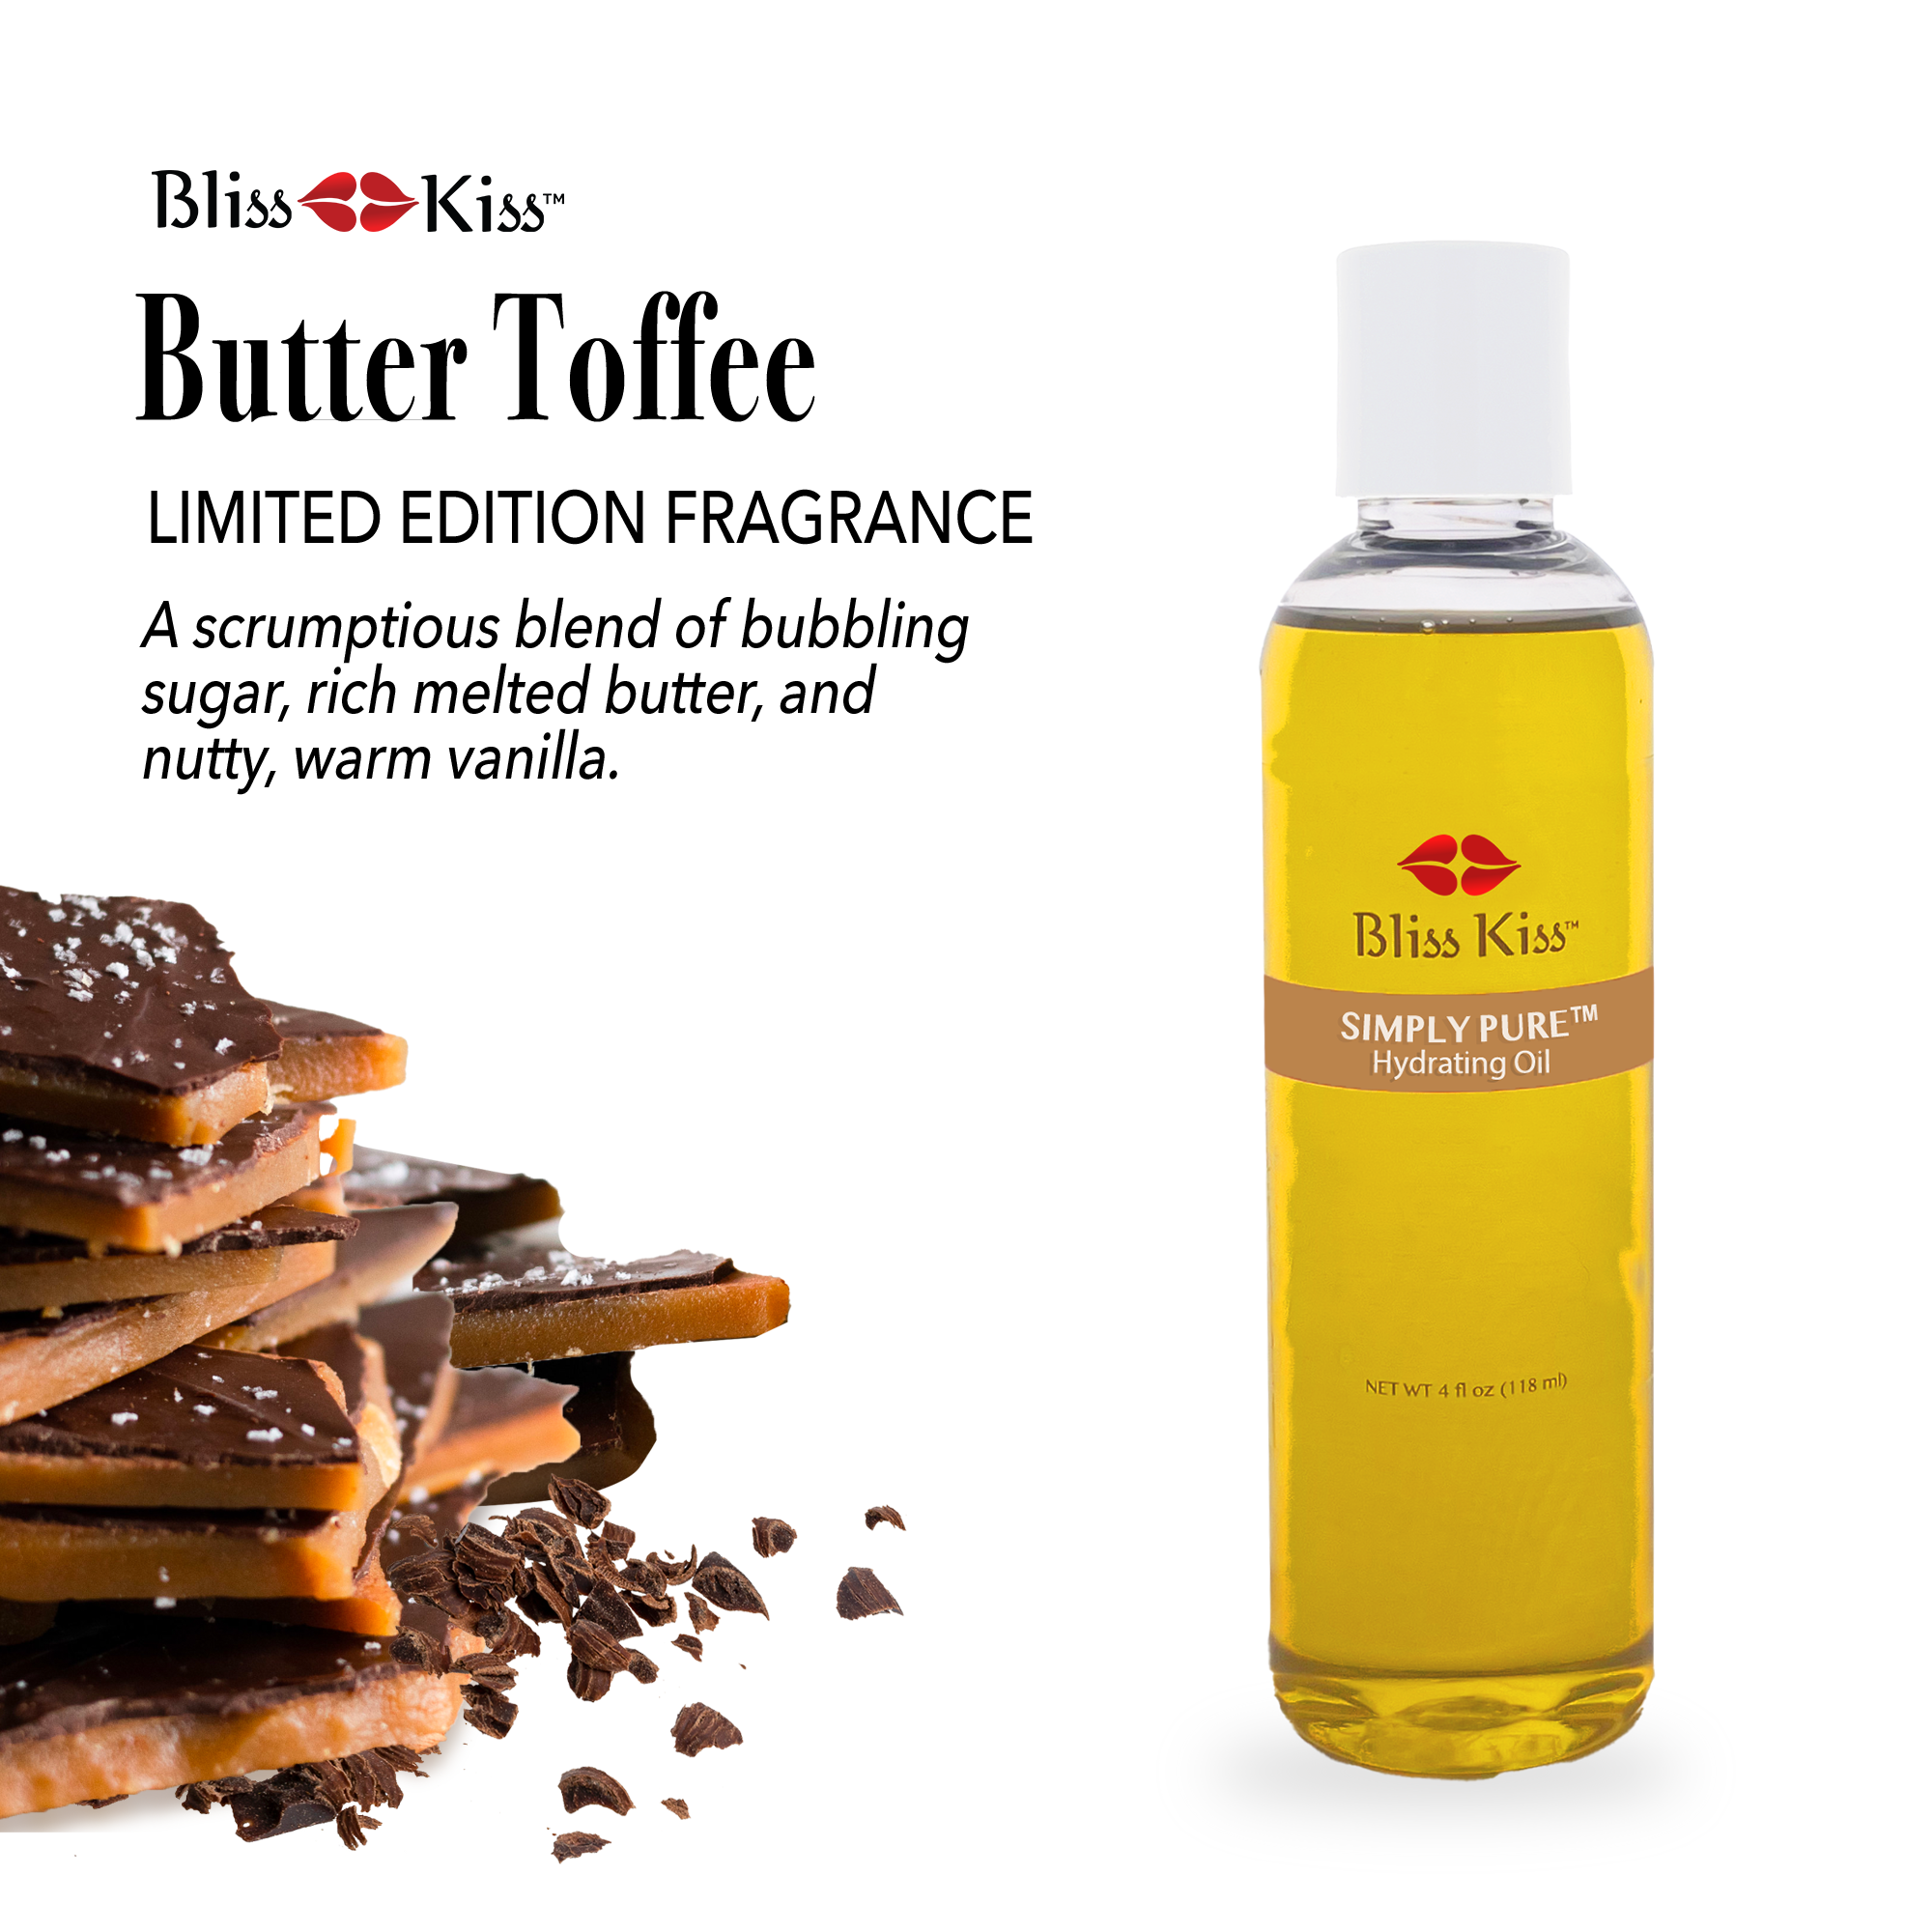 Butter Toffee Limited Edition Fragrance